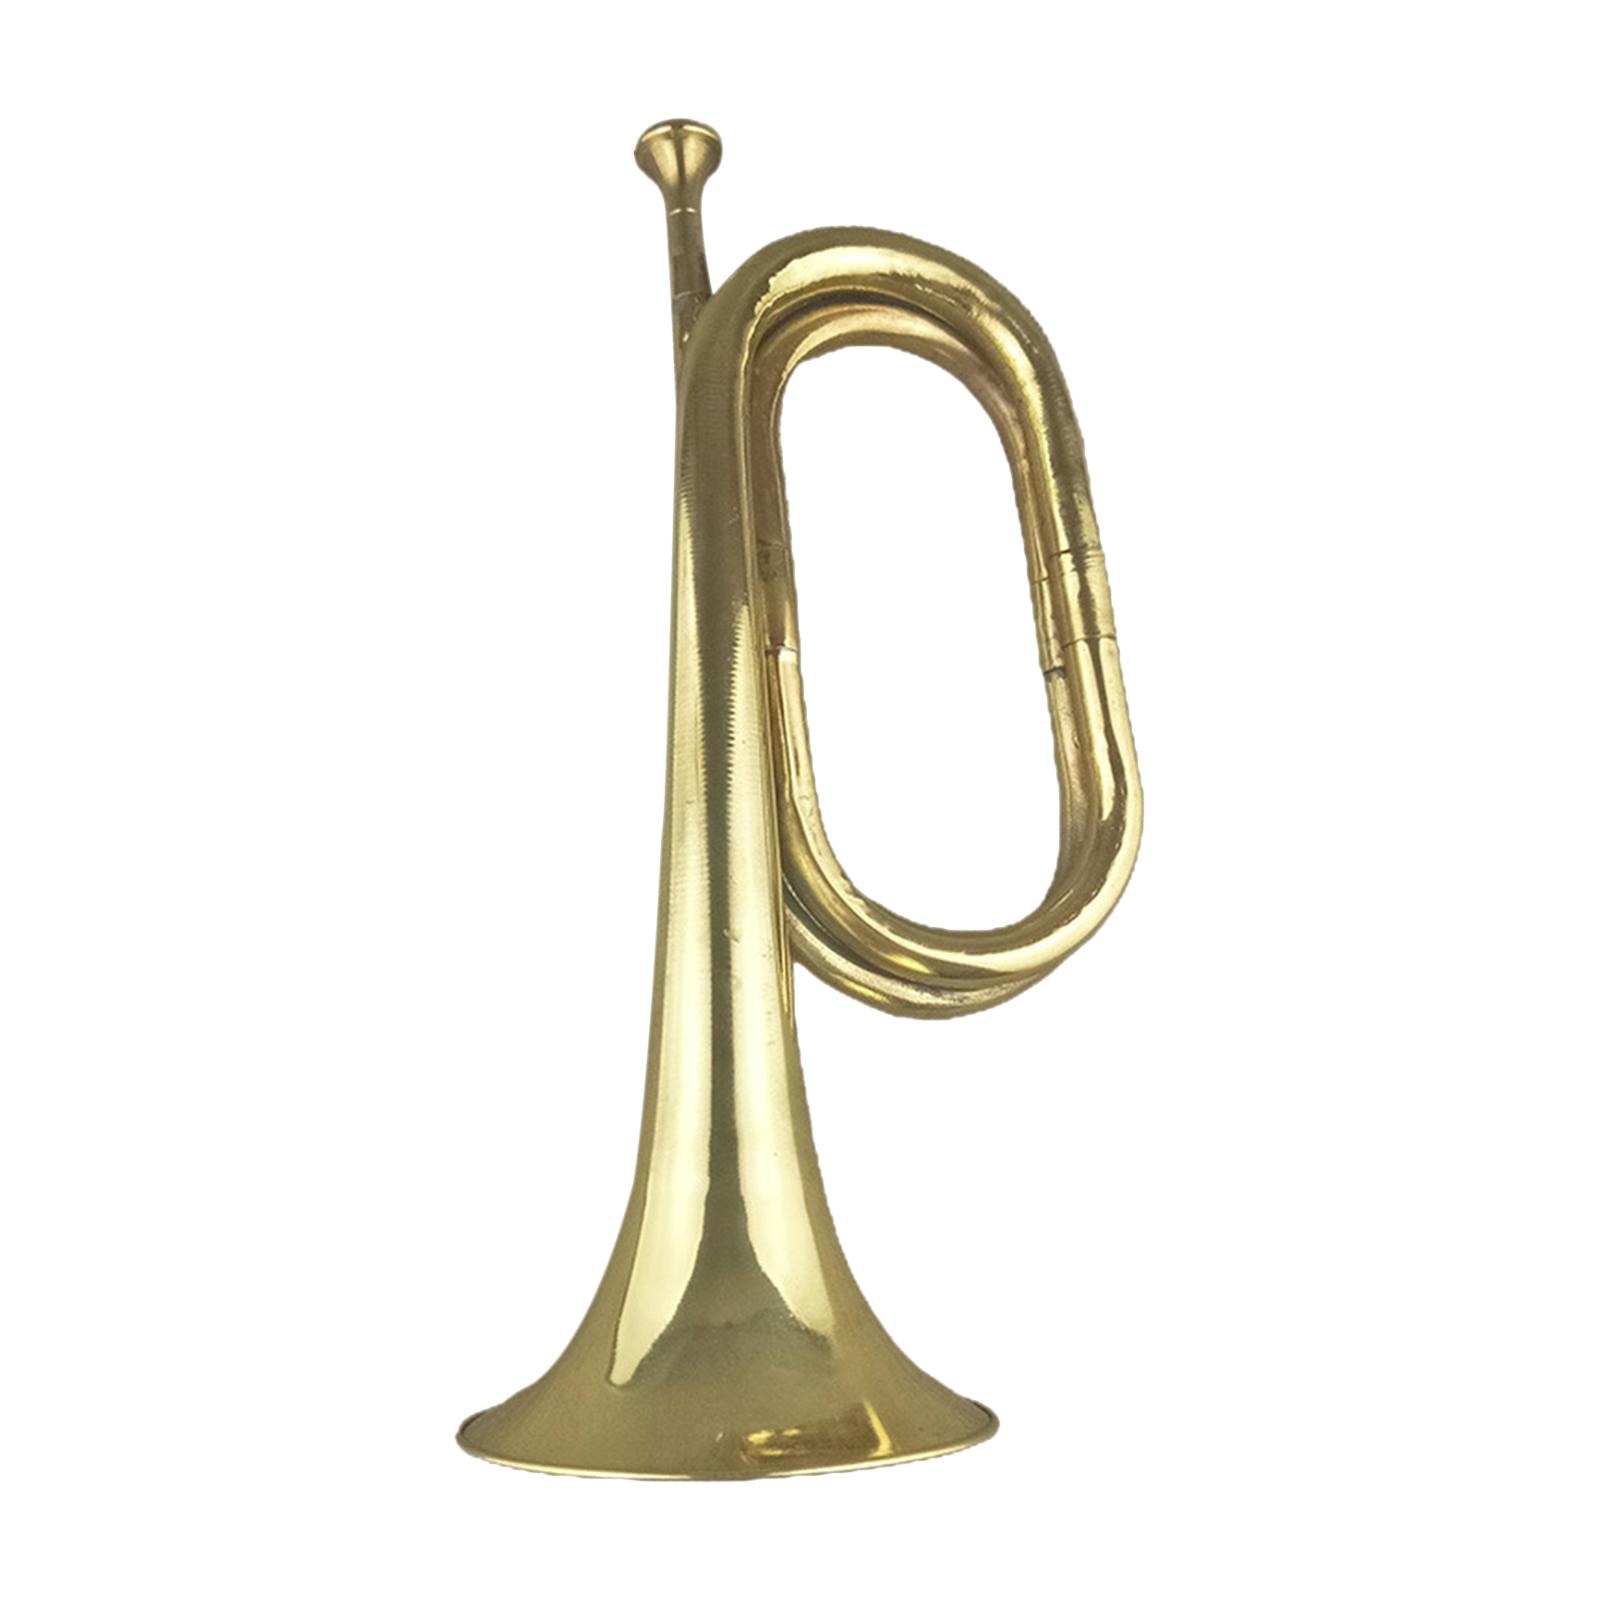 Brass Marching Bugle Music Instrument Early Learning Toy Trumpet for s Kids Children Beginners Scouting